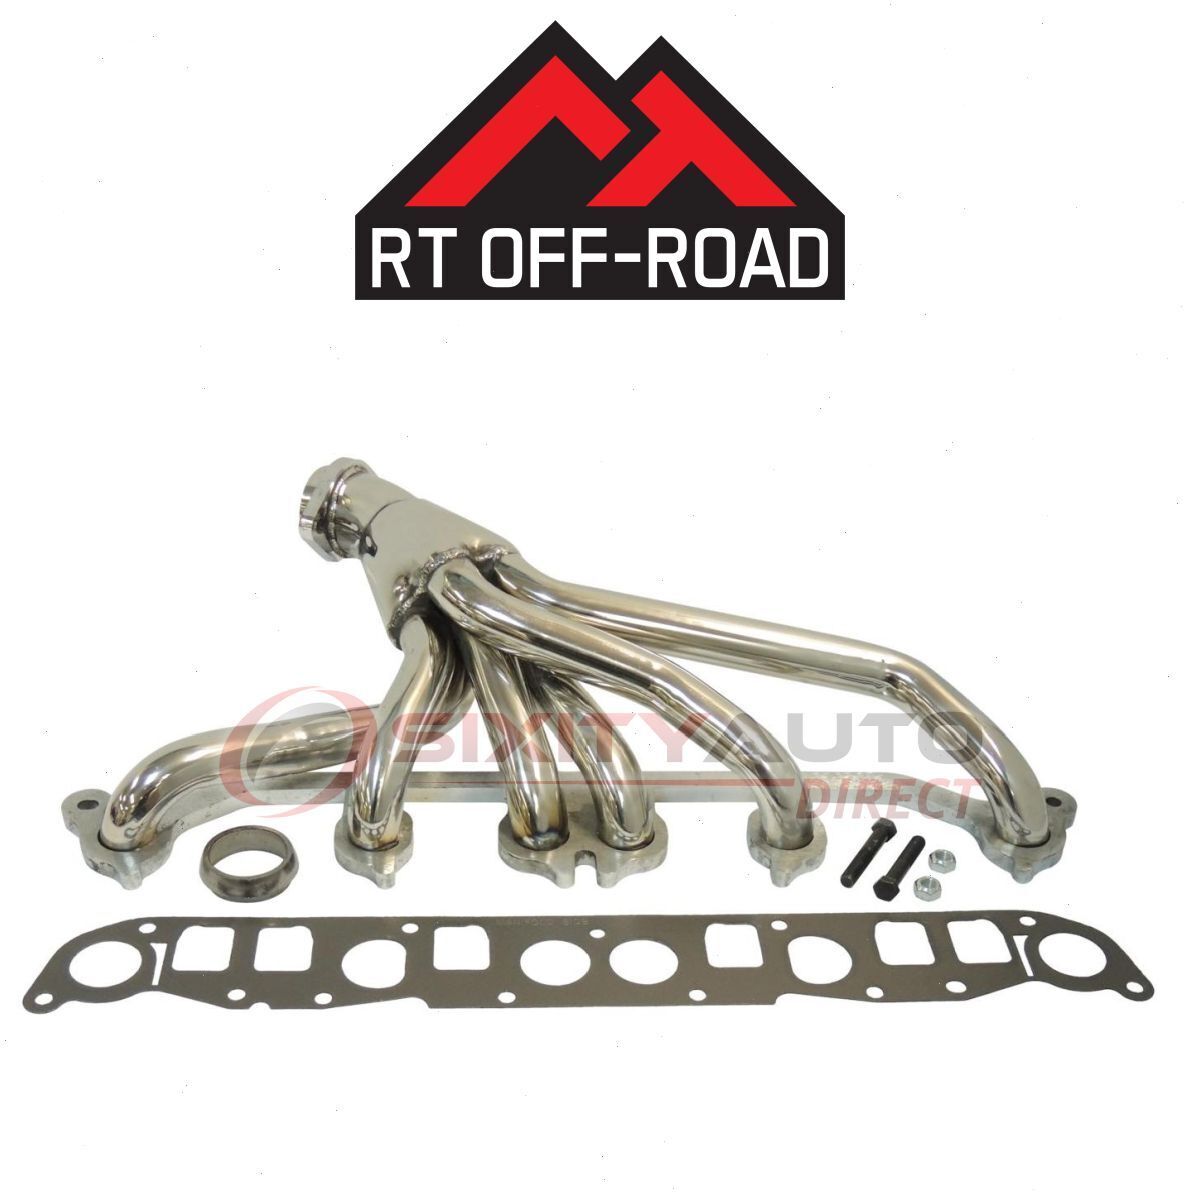 RT Off-Road Exhaust Header for 1991-1999 Jeep Wrangler - Manifolds  dq